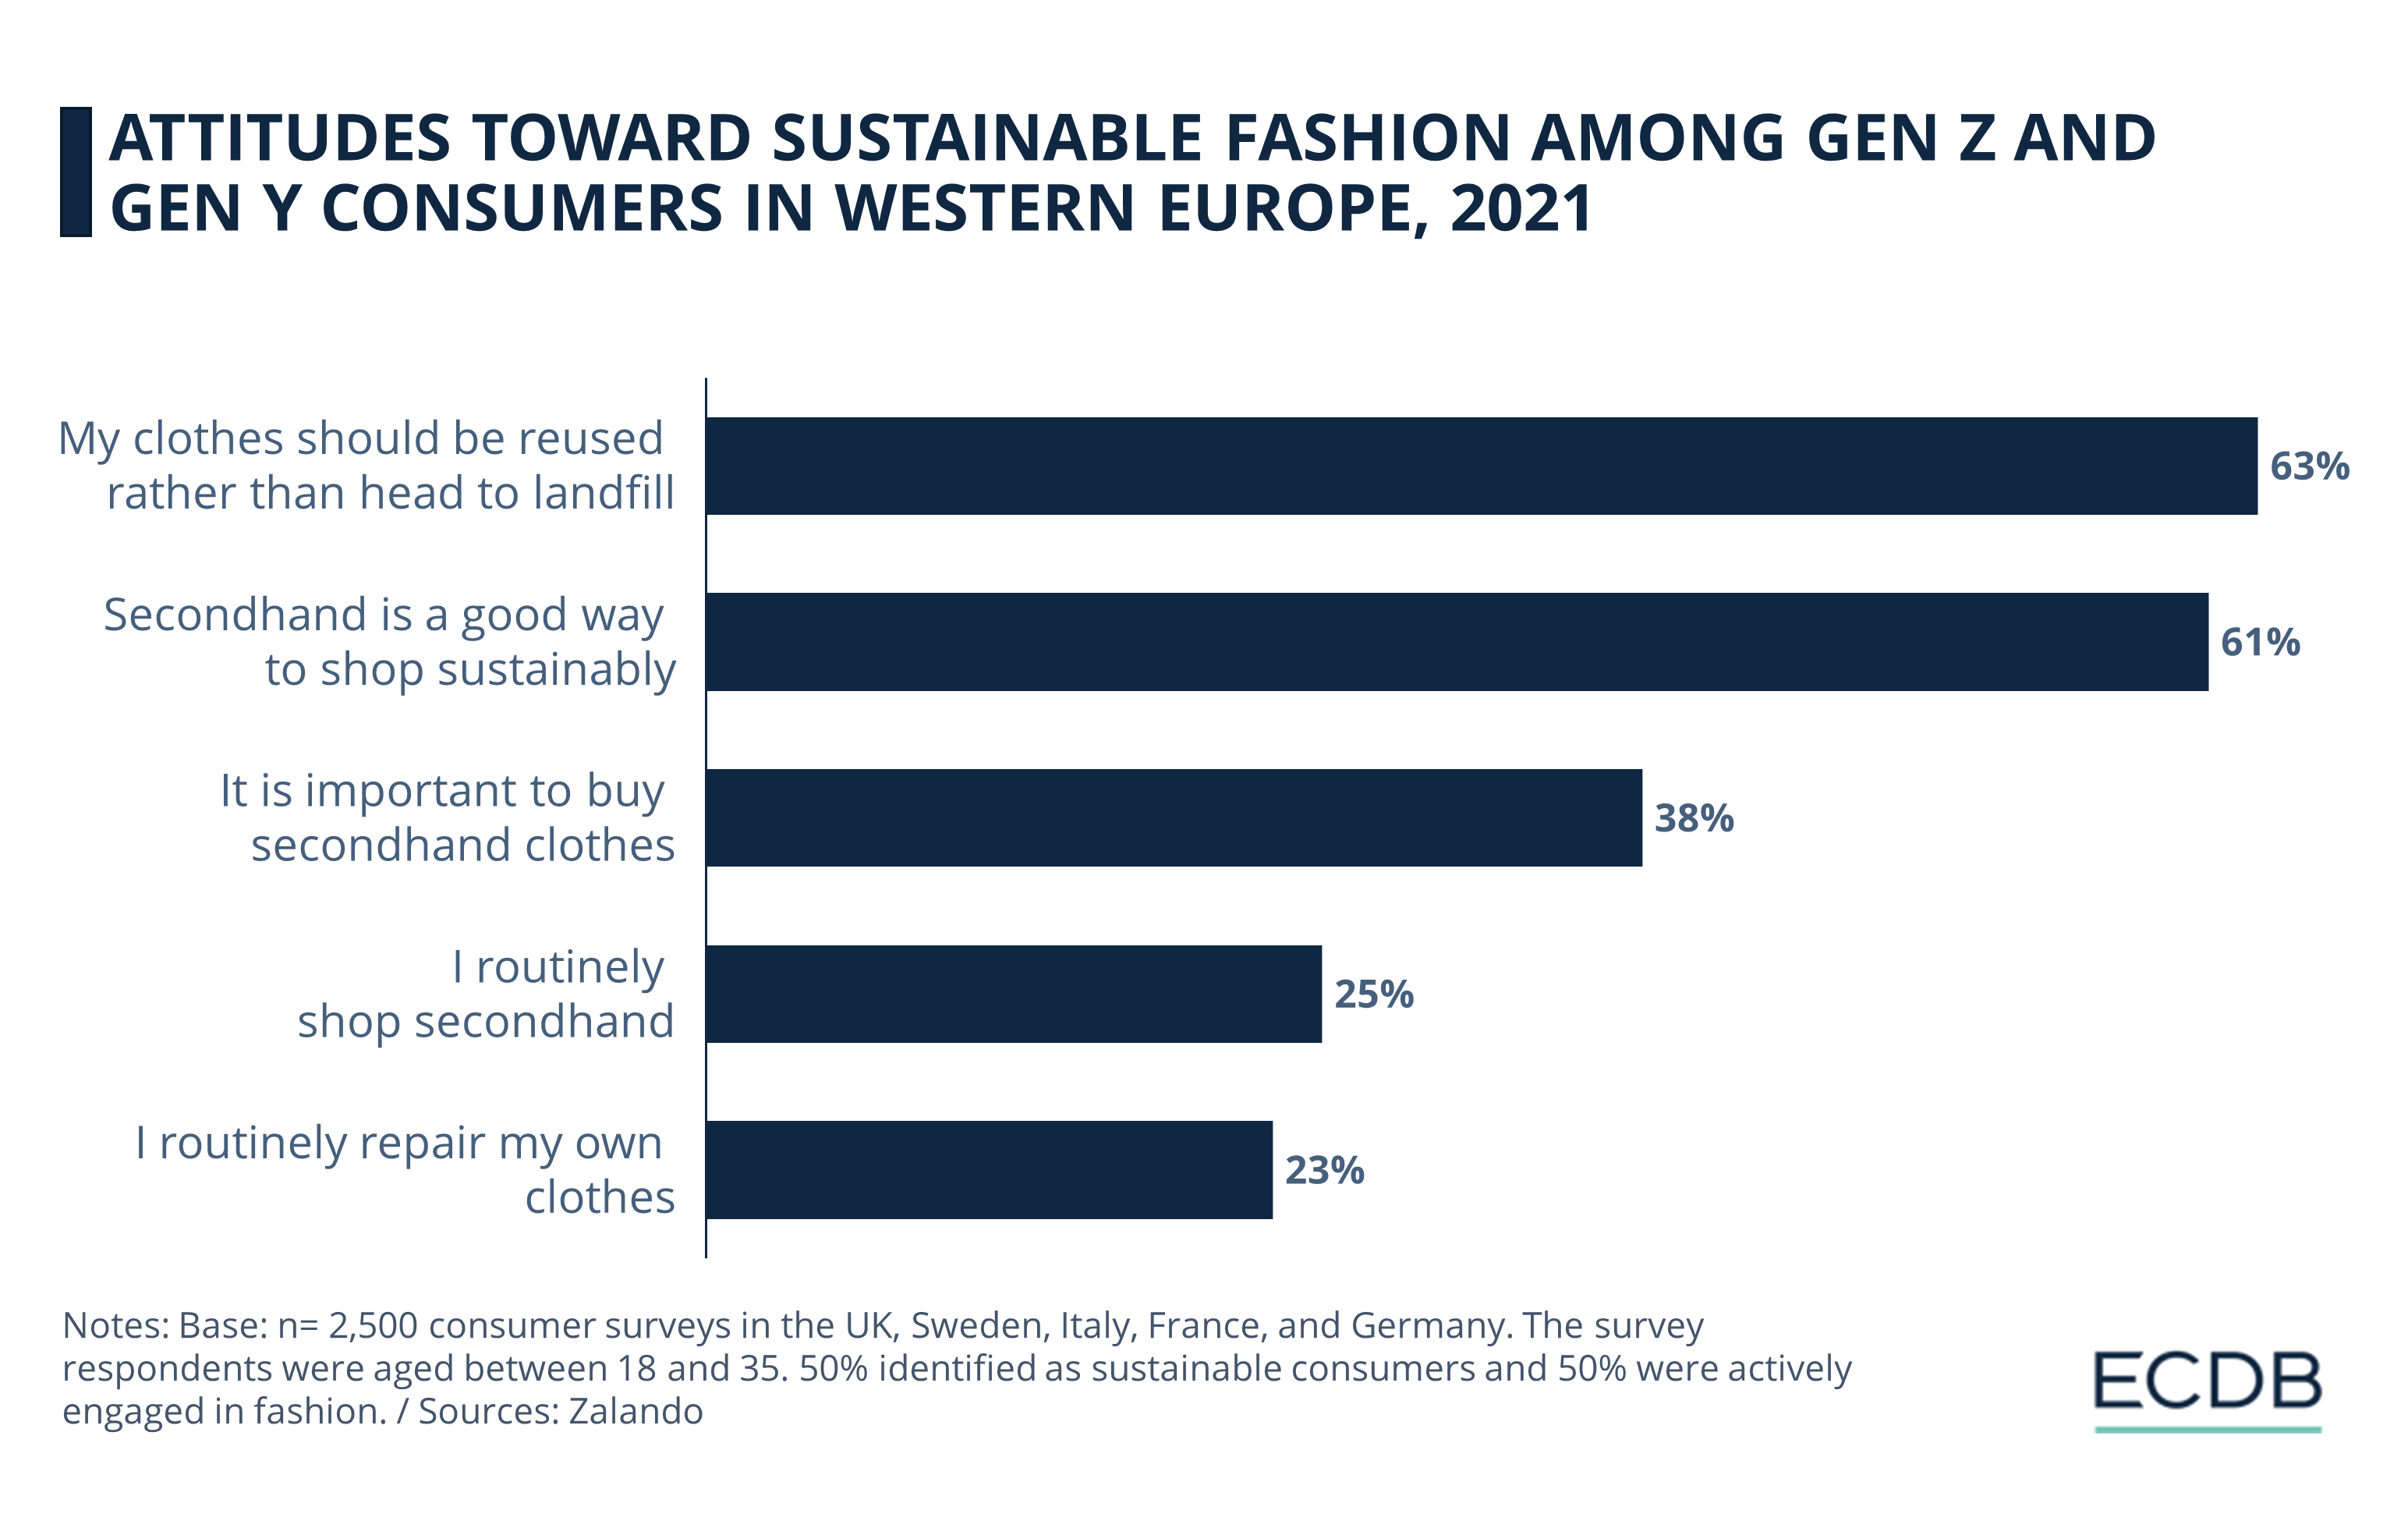 Attitudes Toward Sustainable Fashion Among Gen Z and Gen Y in Western Europe